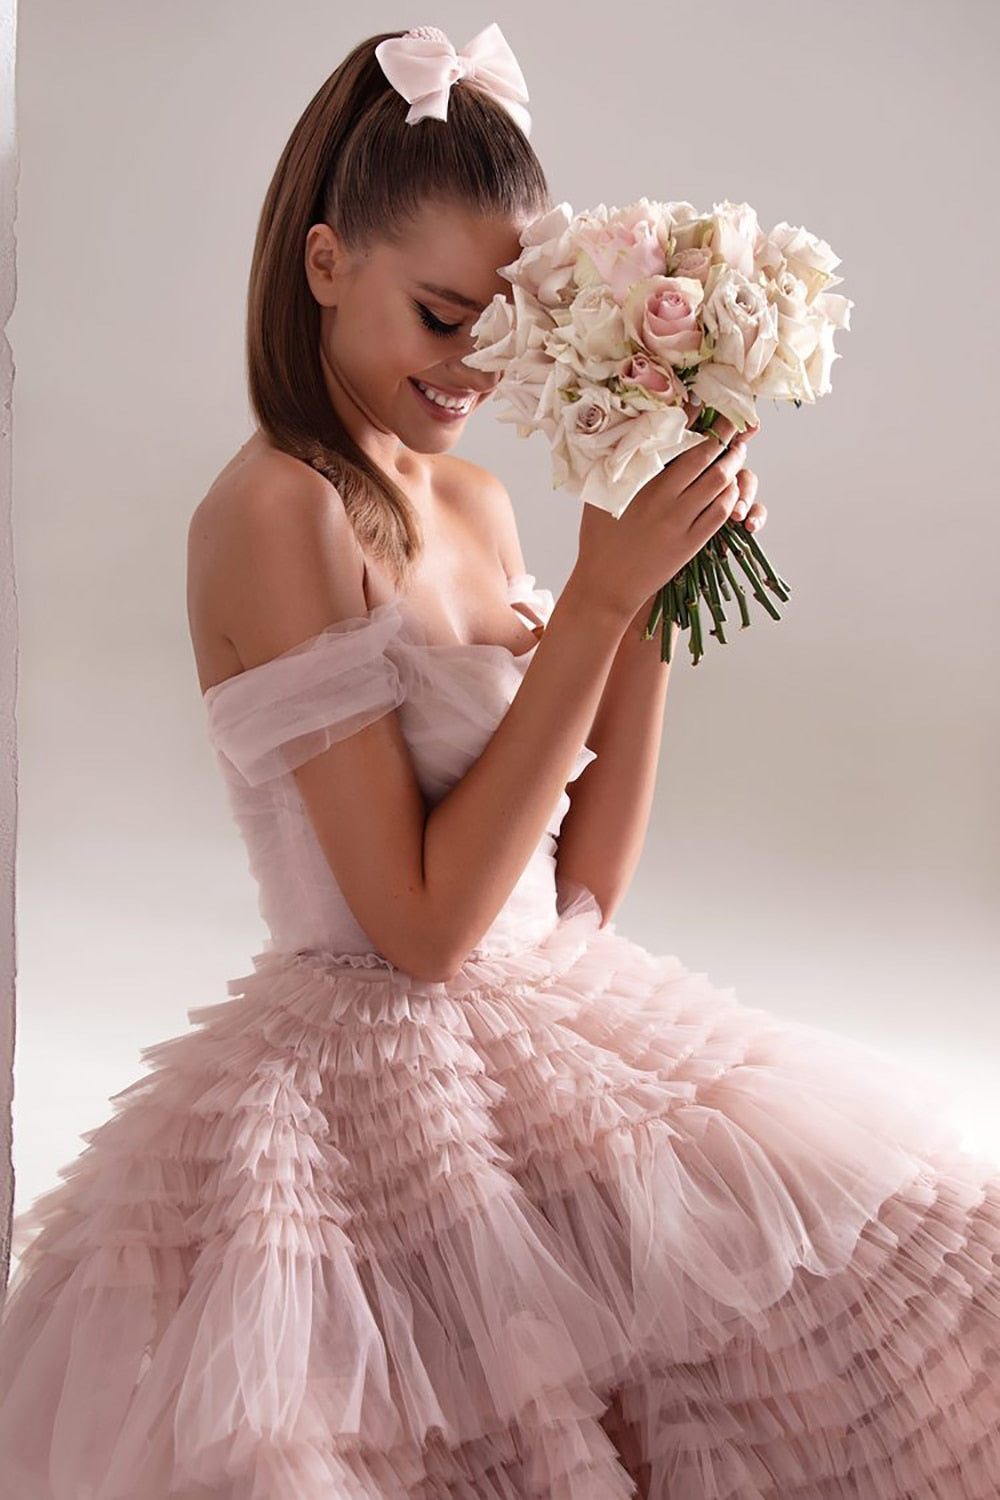 Dusty Pink Tulle Ruffles Gown